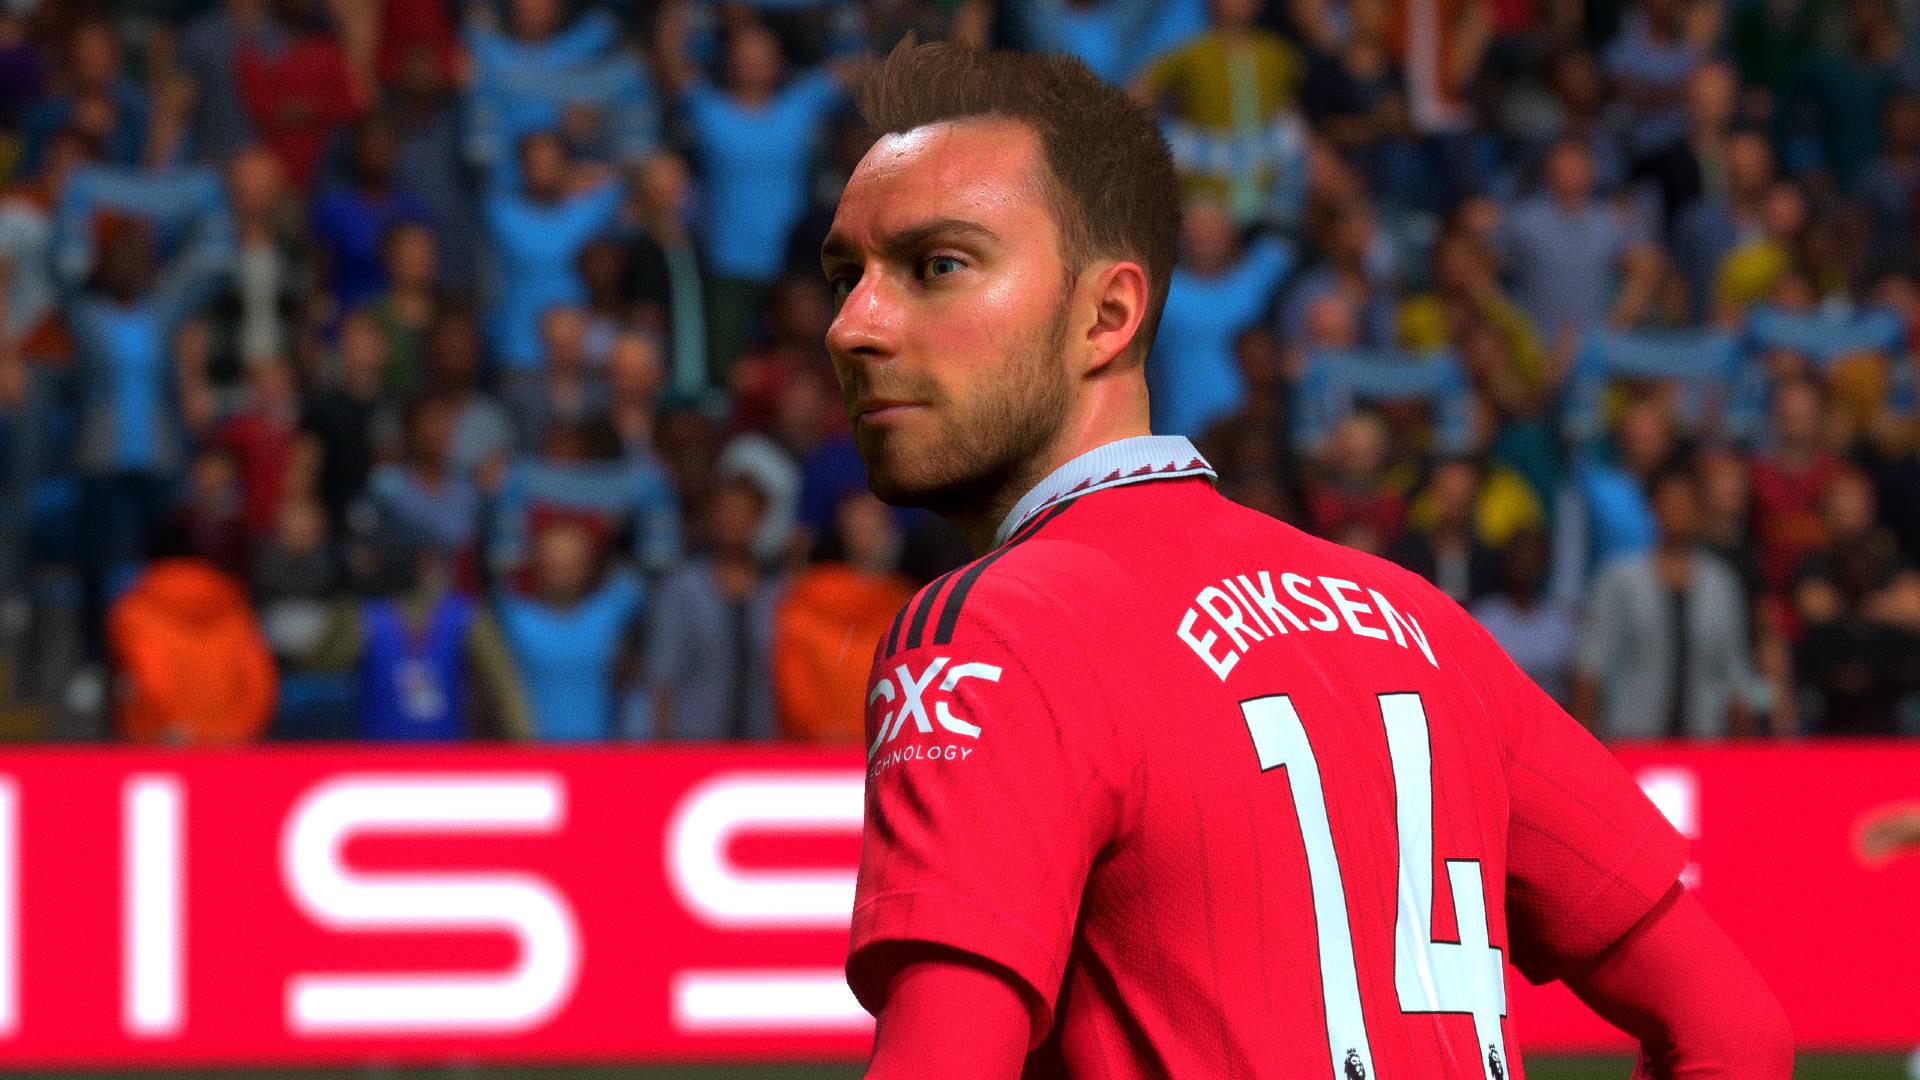 FIFA 23 review: Ultimately, still all about Ultimate Team